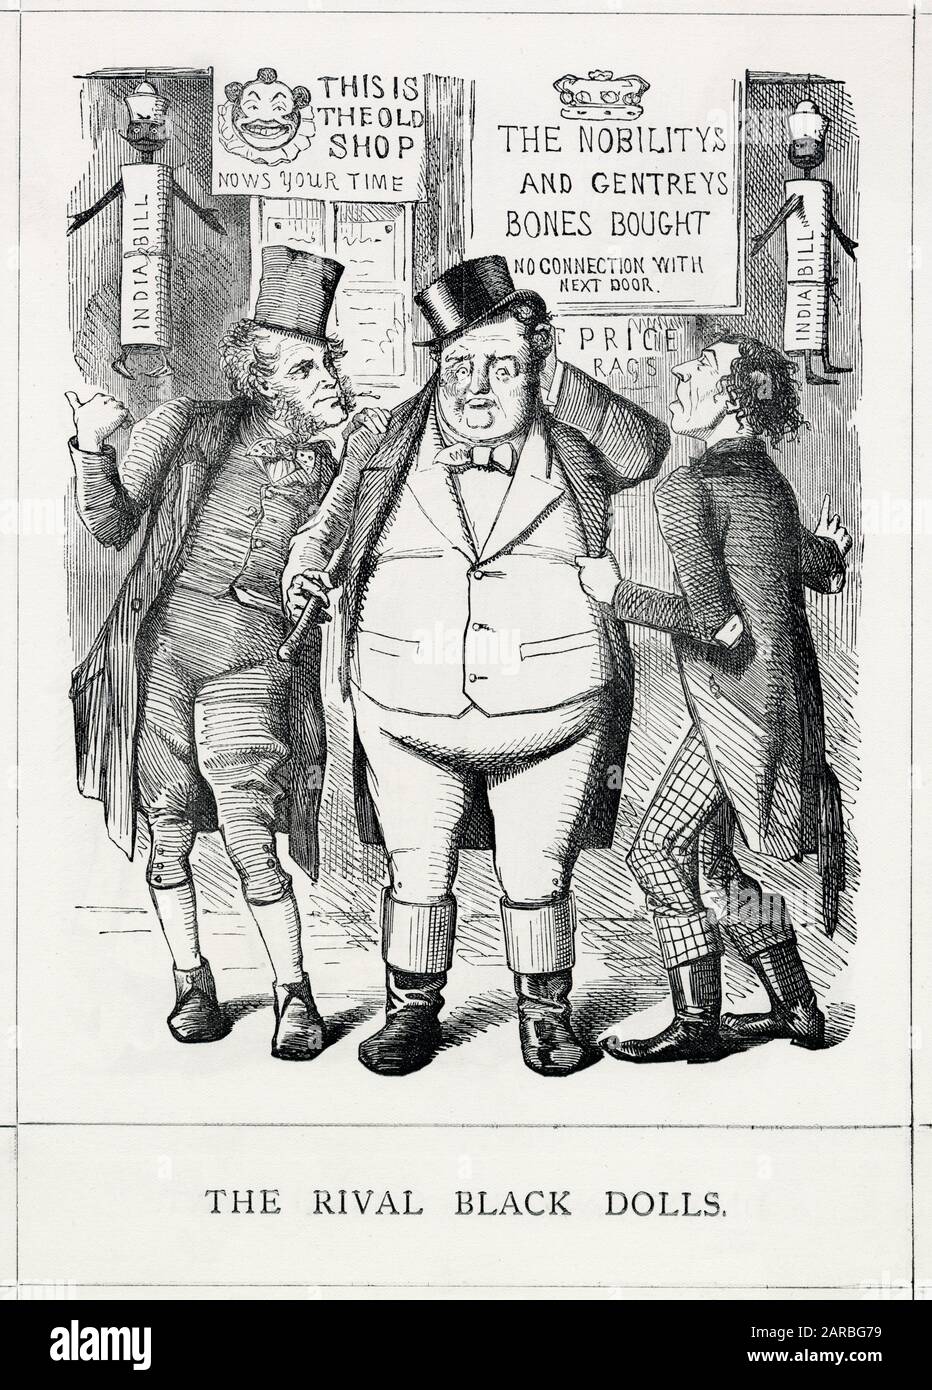 Cartoon, The Rival Black Dolls, showing the former Liberal Prime Minister, Palmerston (left), and the current Conservative MP Benjamin Disraeli (right) in Lord Derby's government, depicted as rival shopkeepers. They had both been involved in promoting two separate India Bills, designed to transfer power from the British East India Company to the Crown, in response to the Indian Rebellion (Mutiny) of the previous year. The Conservative-supported Bill was passed on 2 August 1858. Stock Photo